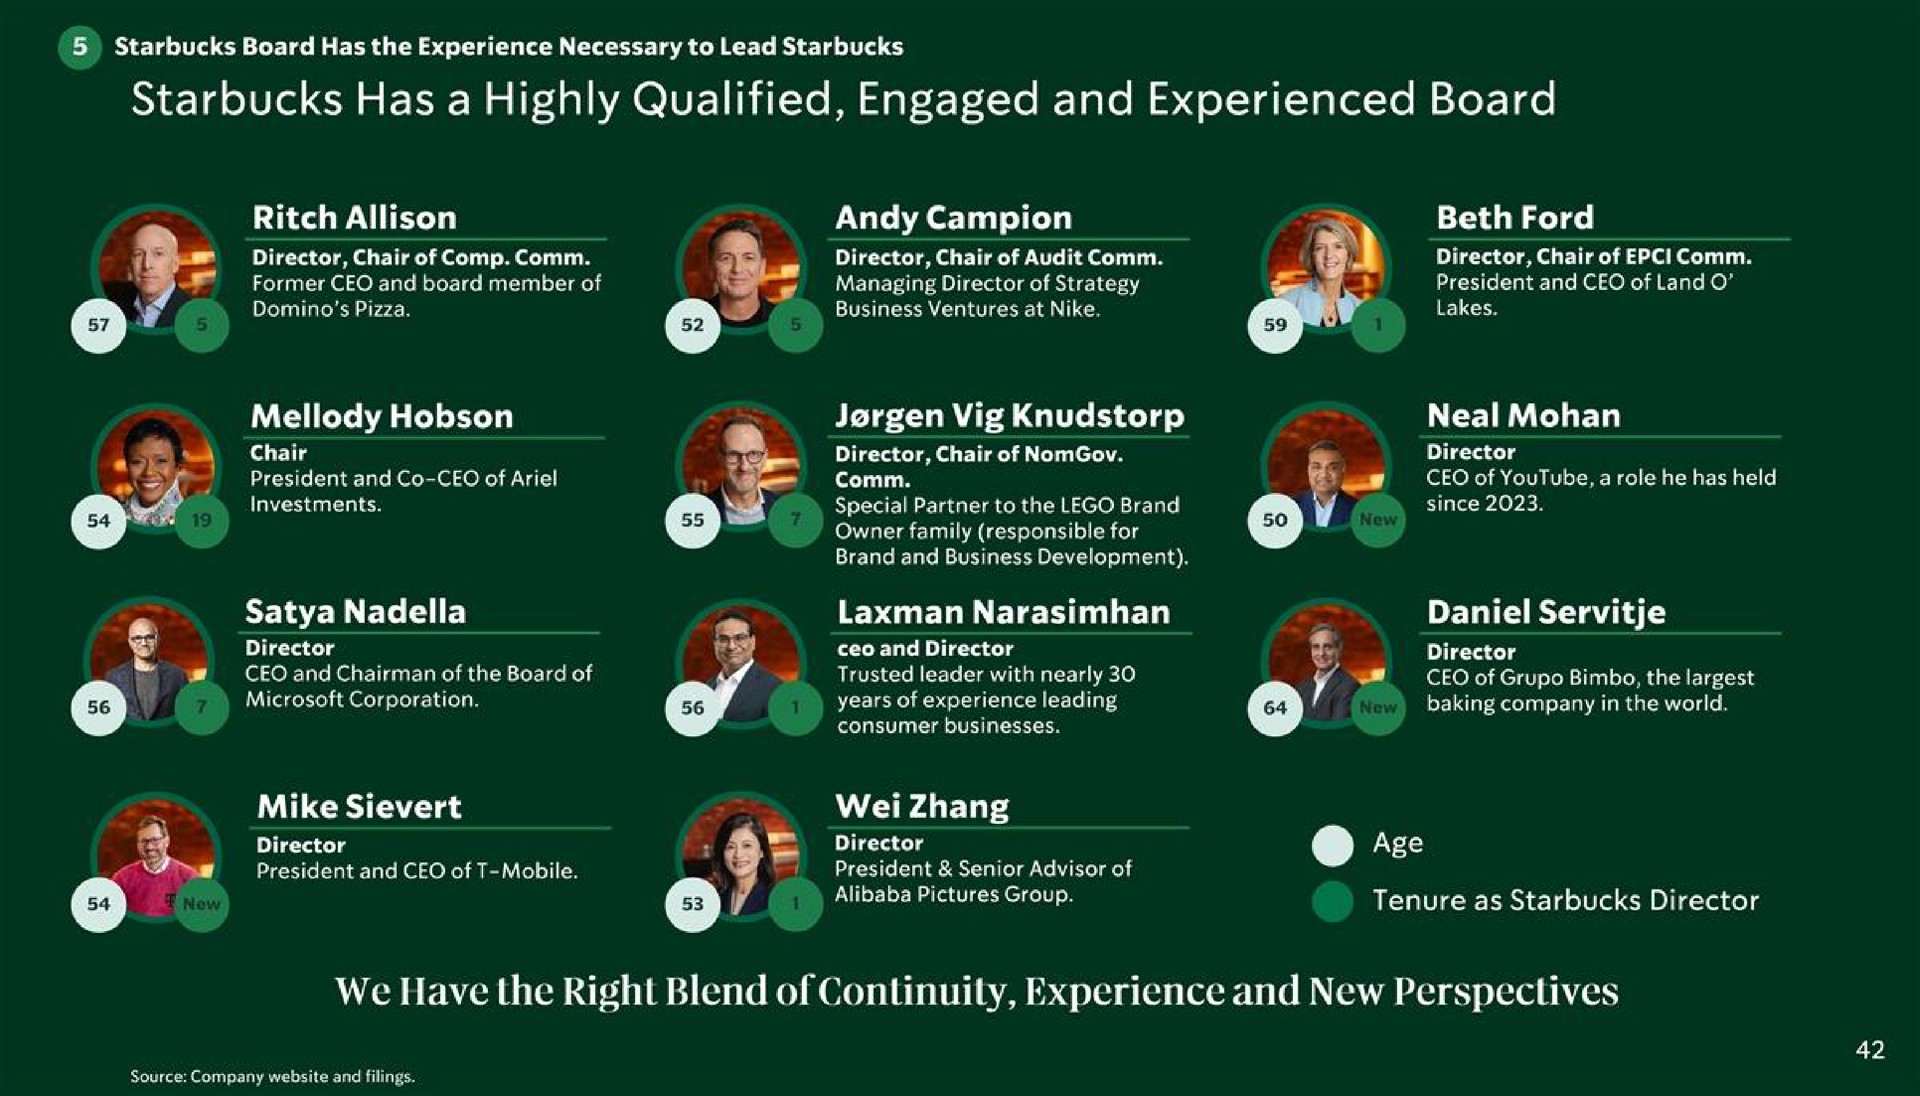 has a highly qualified engaged and experienced board is i we have the right blend of continuity experience and new perspectives | Starbucks